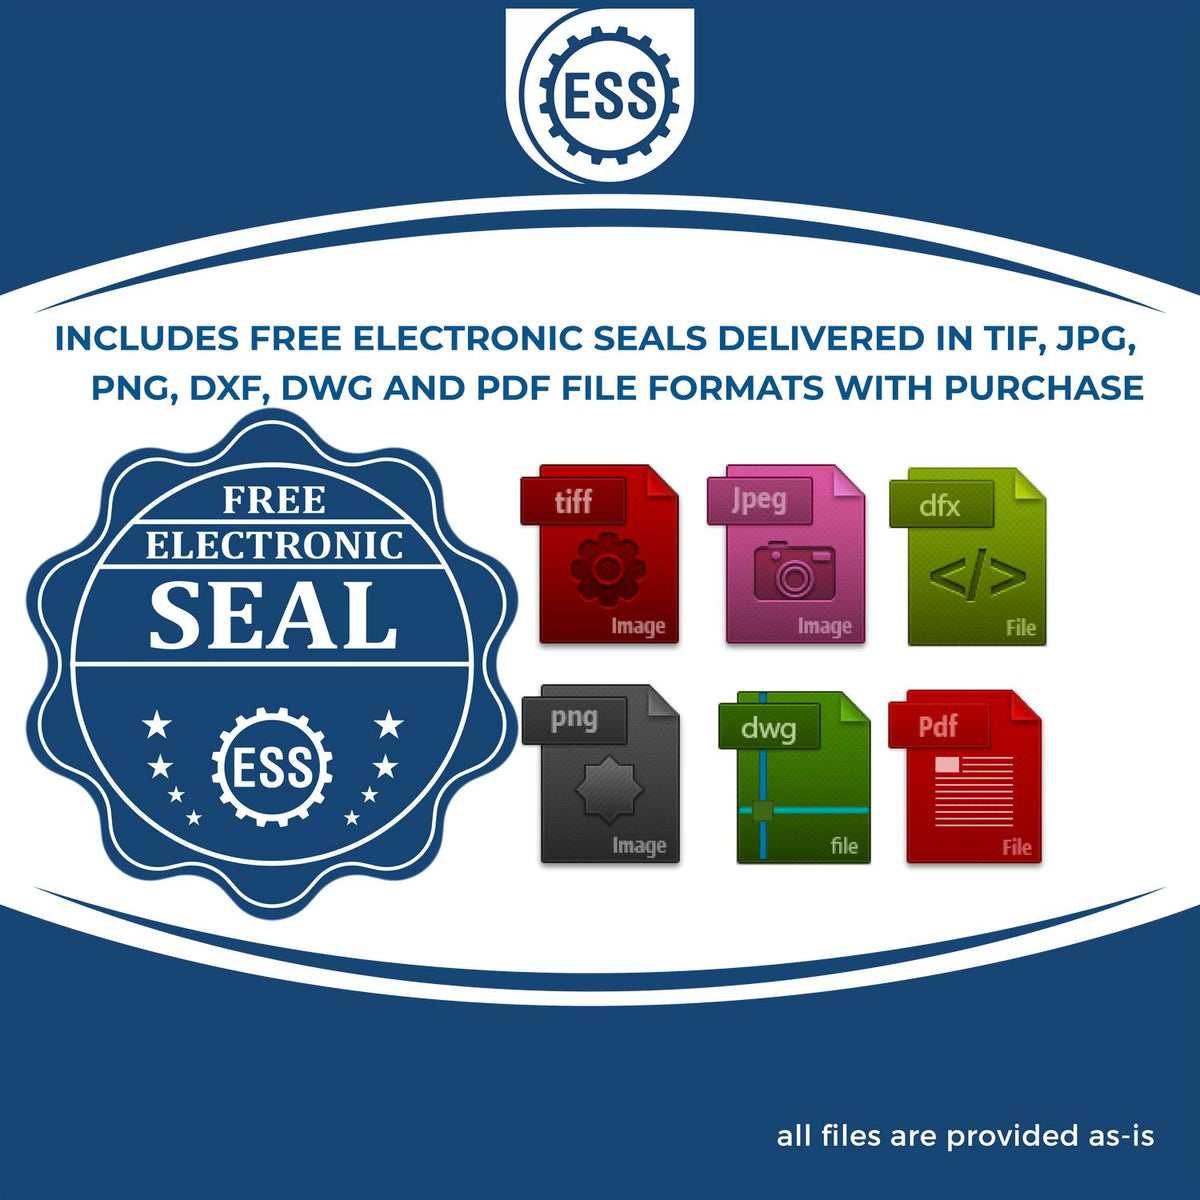 An infographic for the free electronic seal for the Extended Long Reach Missouri Surveyor Embosser illustrating the different file type icons such as DXF, DWG, TIF, JPG and PNG.